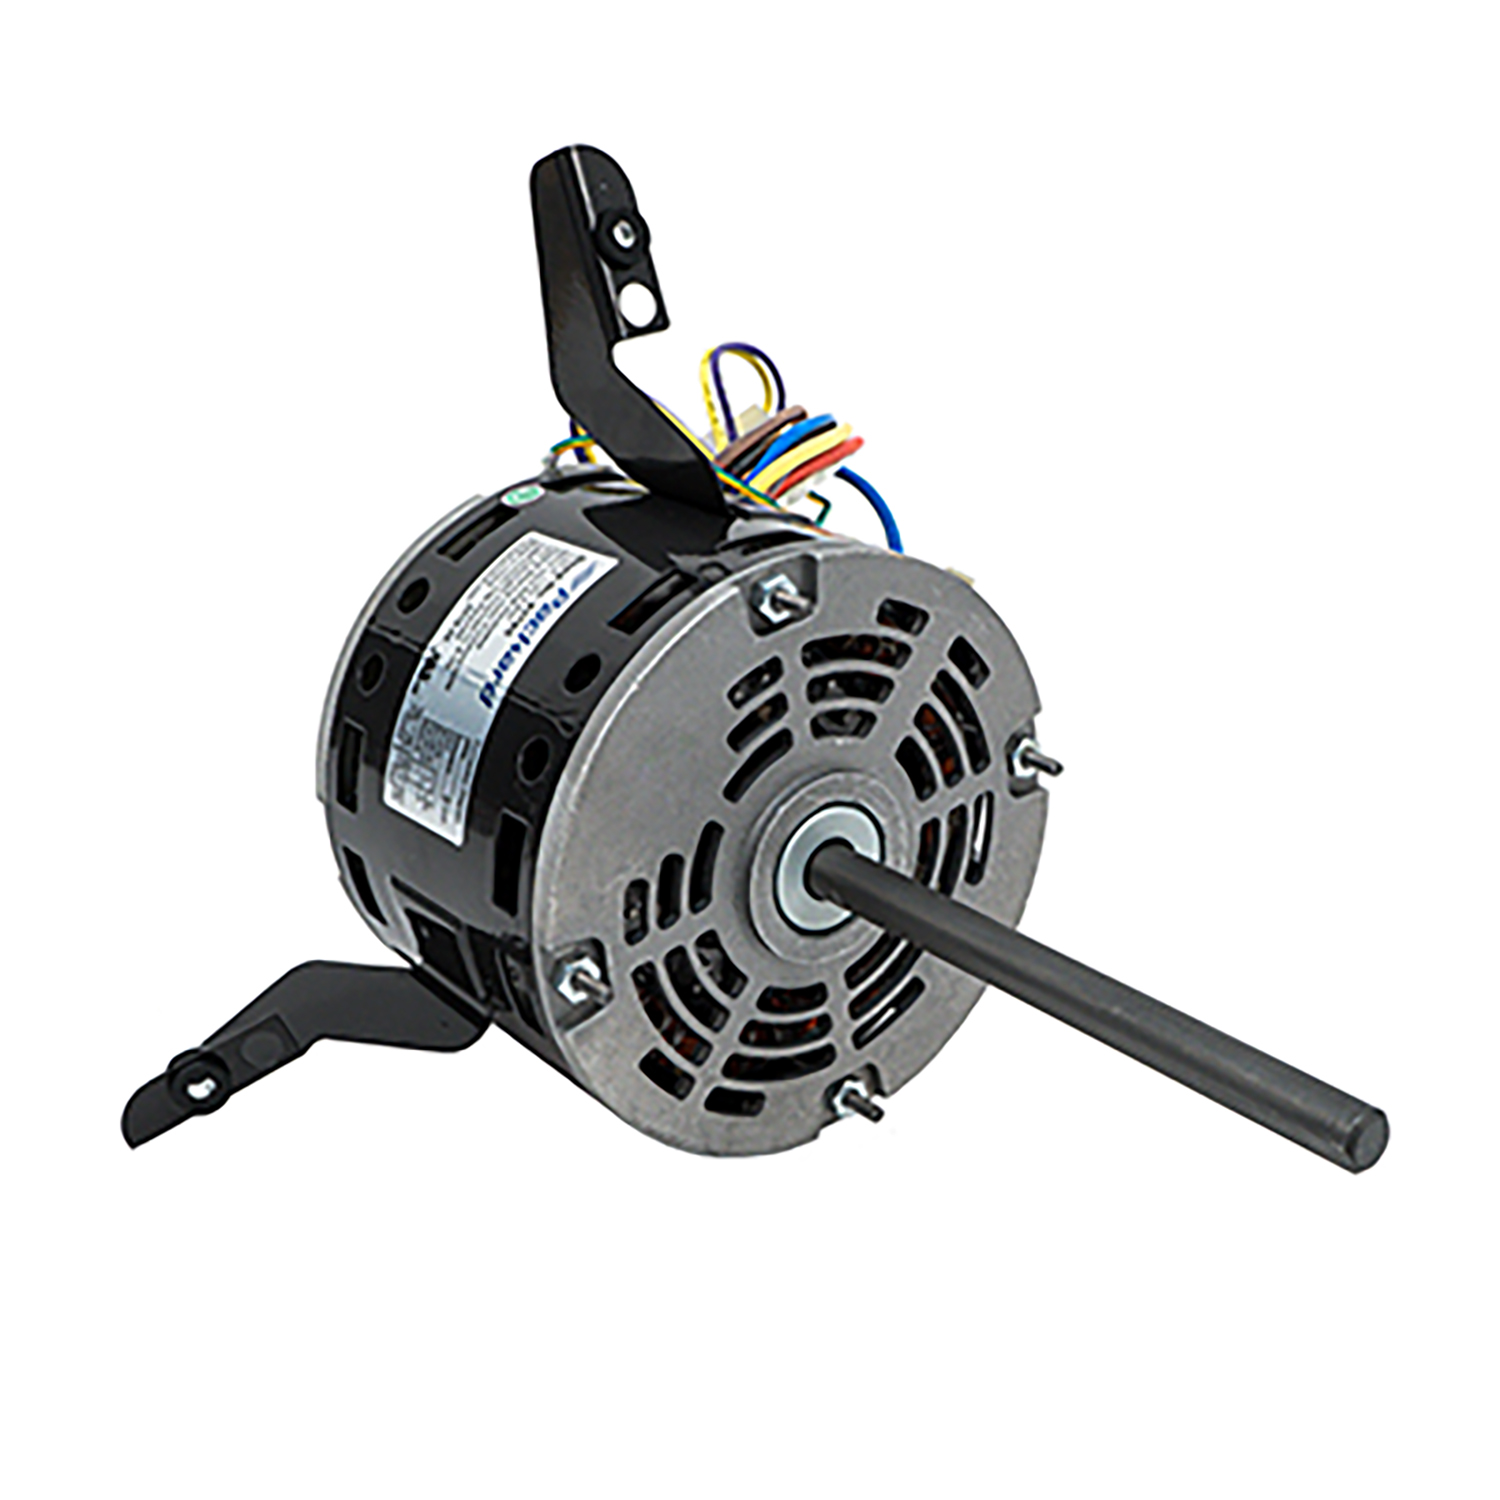 48 Frame Direct Drive Blower Motor 3/4 HP, 208-230 Volts, 1075 RPM, 3 Speed